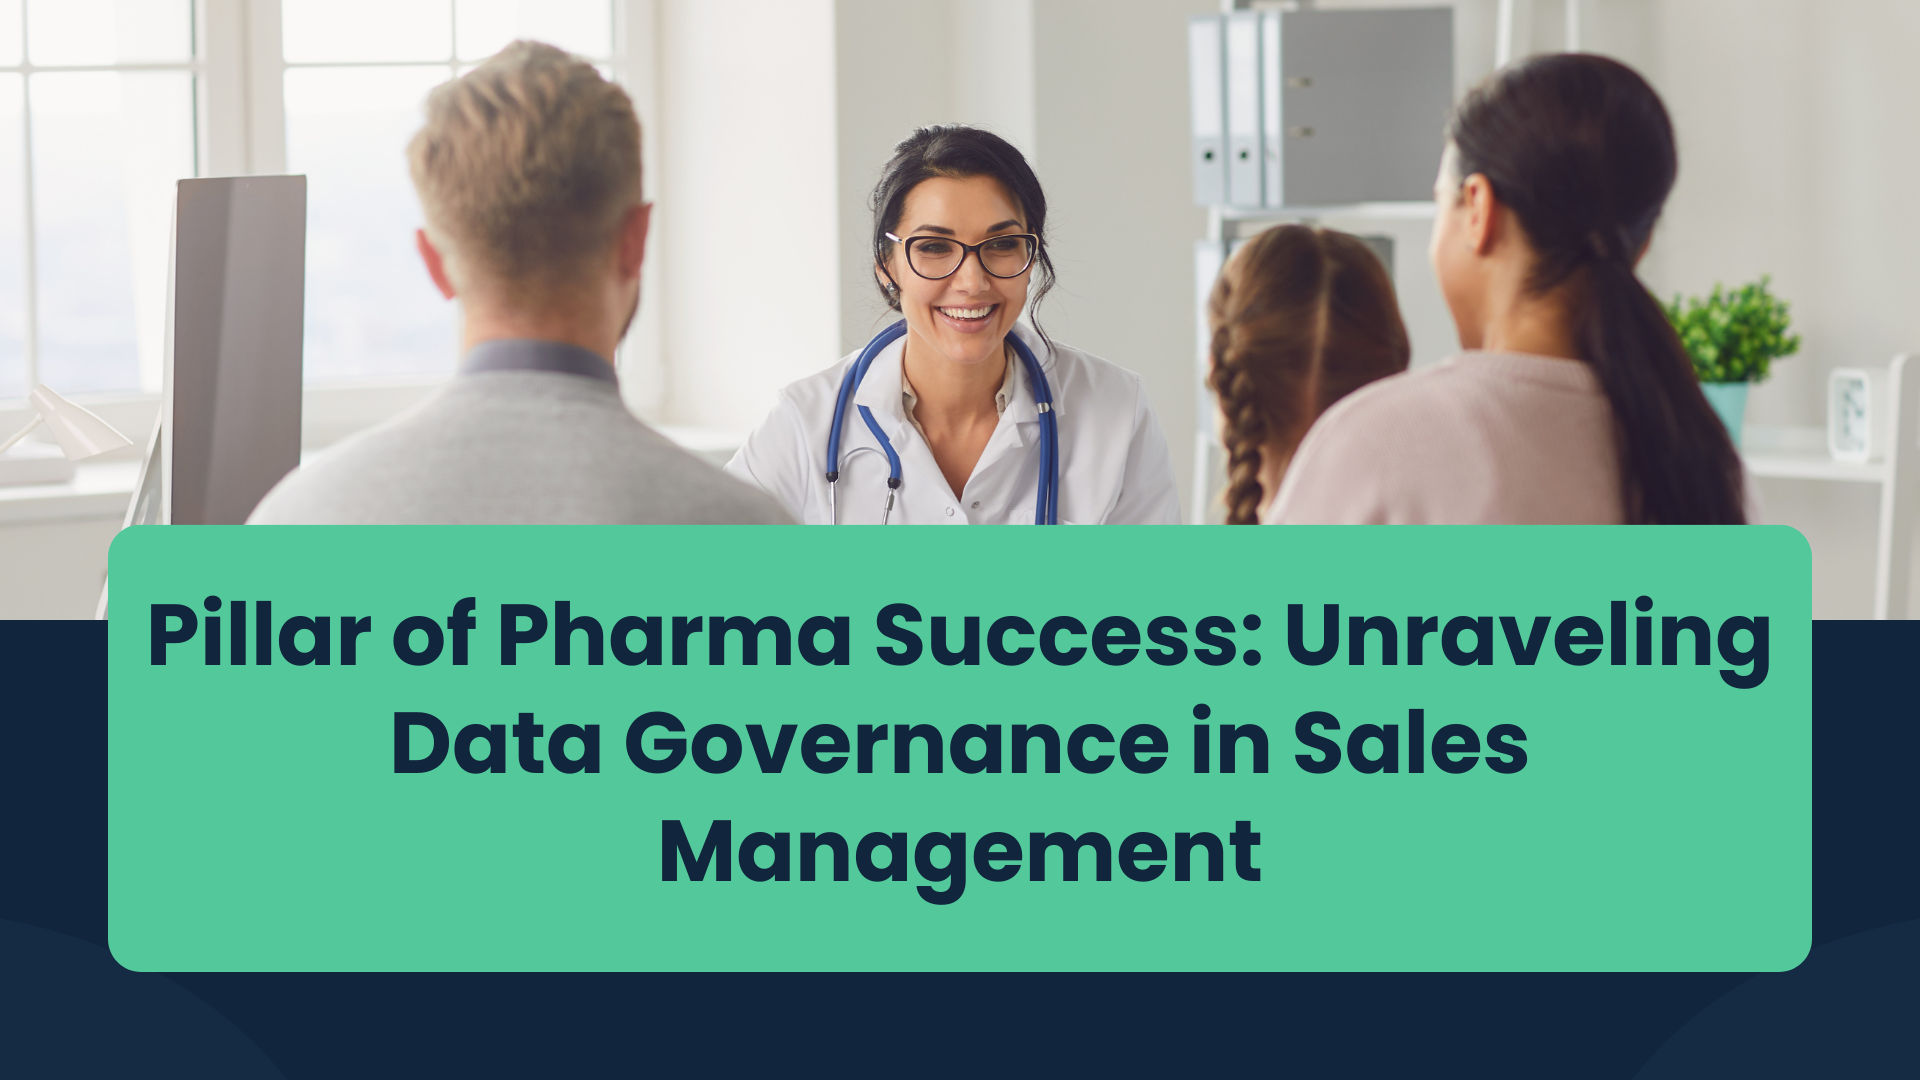 Unravelling Data Governance Meaning in Pharma Sales Management and MedRep Visits